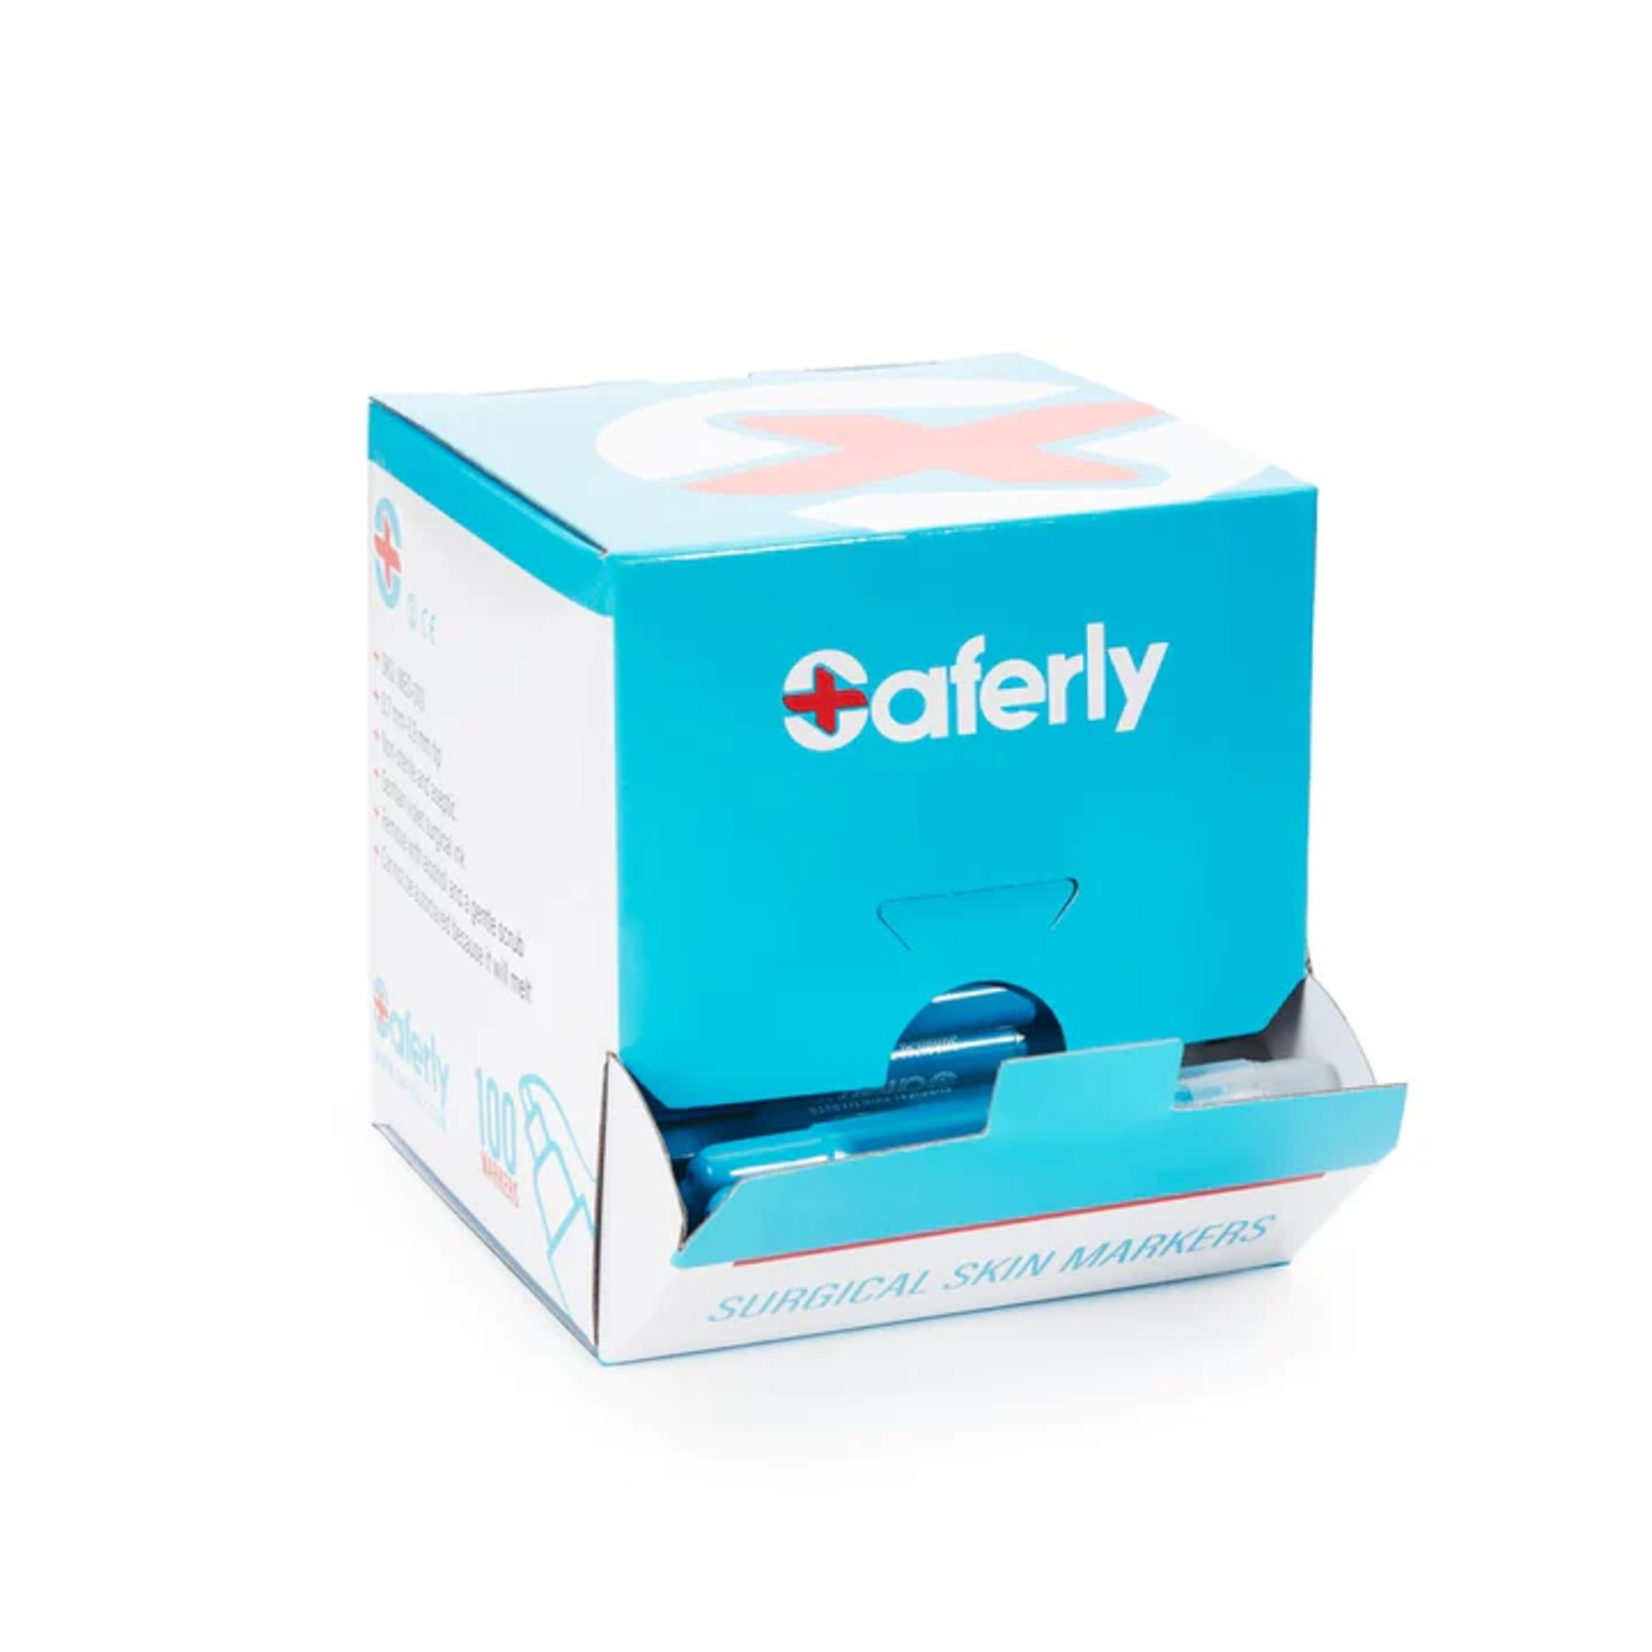 SAFERLY SURGICAL SKIN MARKERS